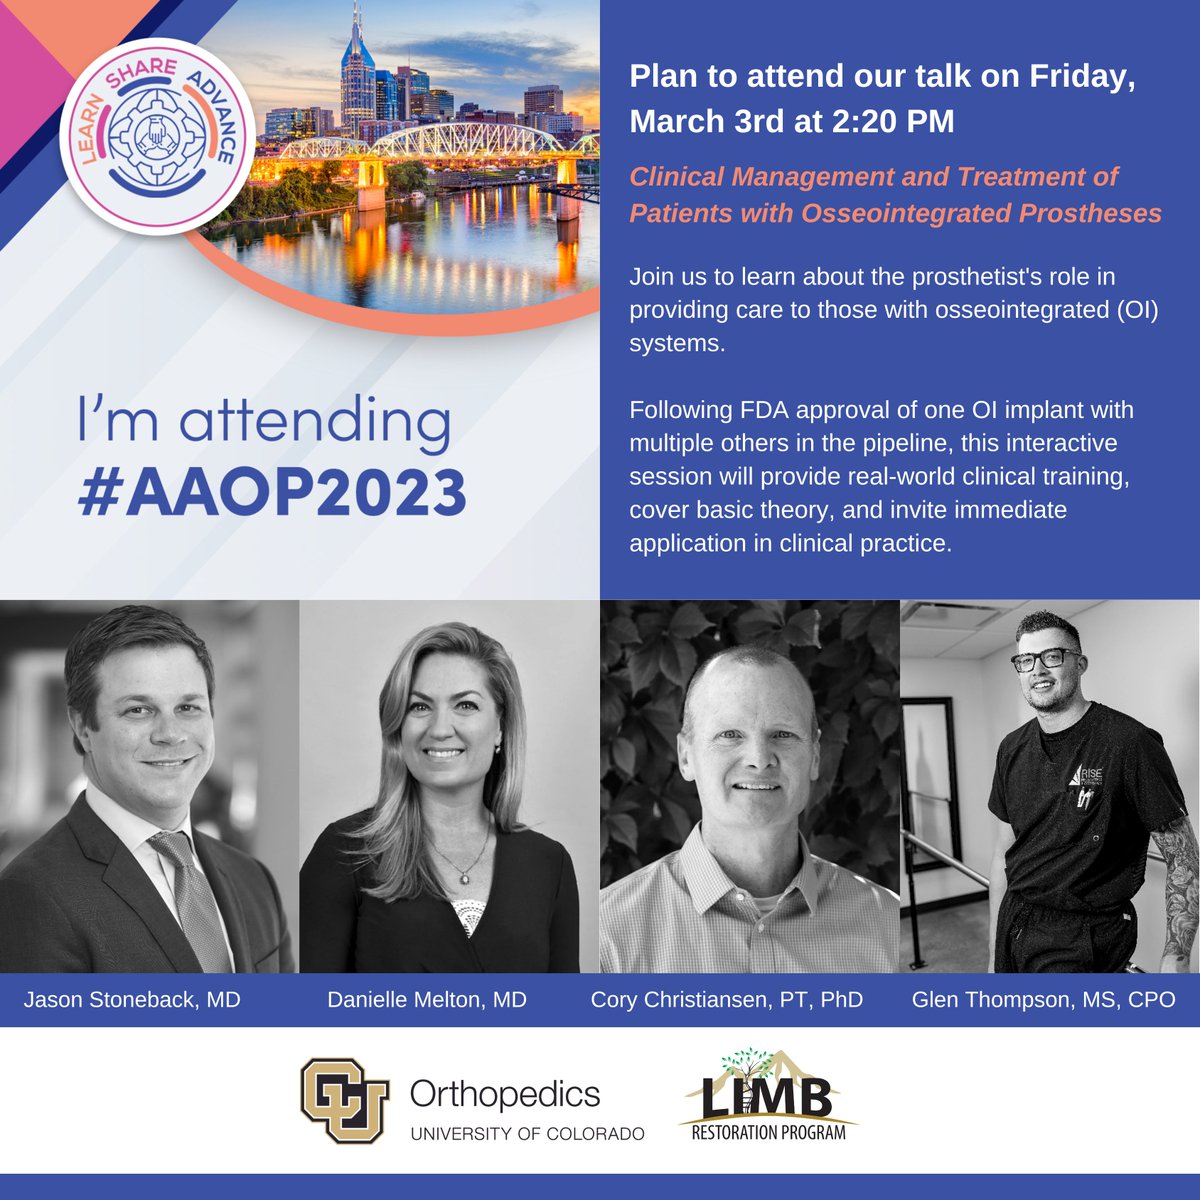 We'll see you at 2:20pm in Presidential Ballroom D for 'Clinical Management and Treatment of Patients with Osseointegrated Prostheses! #AAOP2023